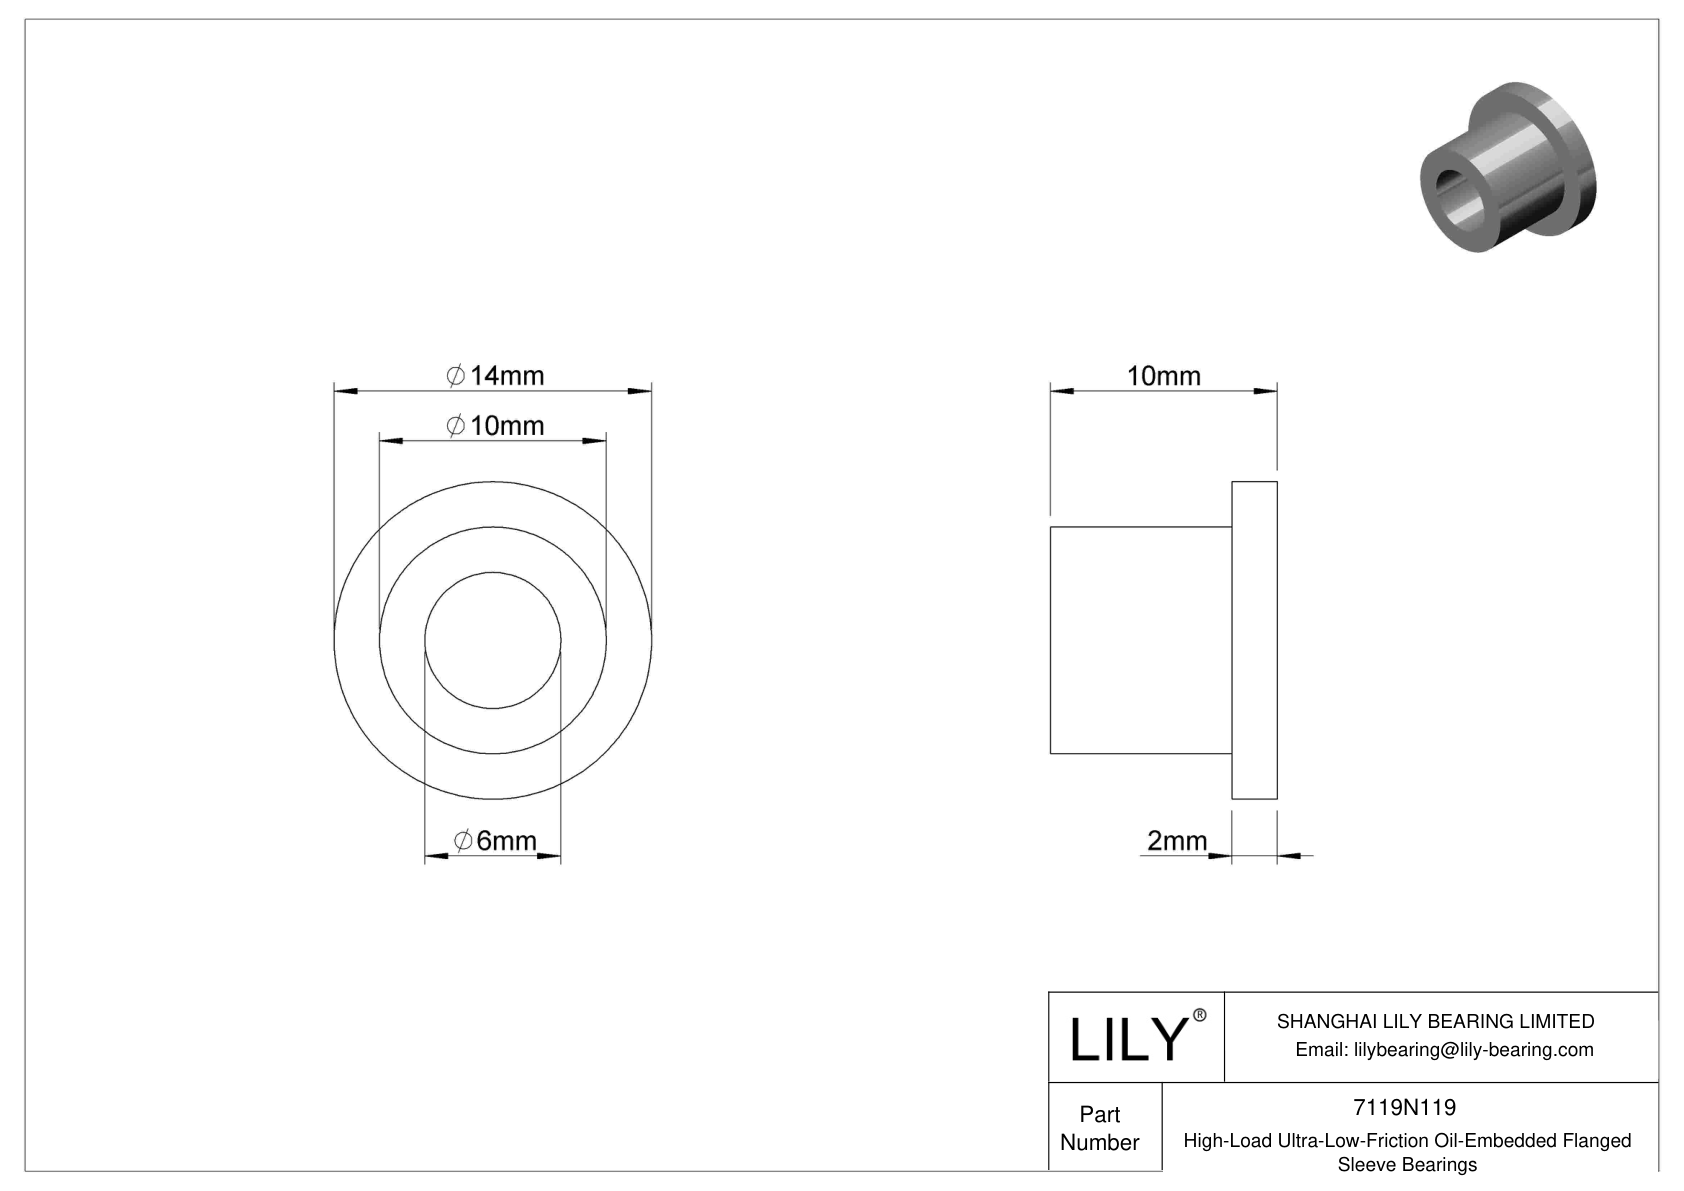 HBBJNBBJ High-Load Ultra-Low-Friction Oil-Embedded Flanged Sleeve Bearings cad drawing